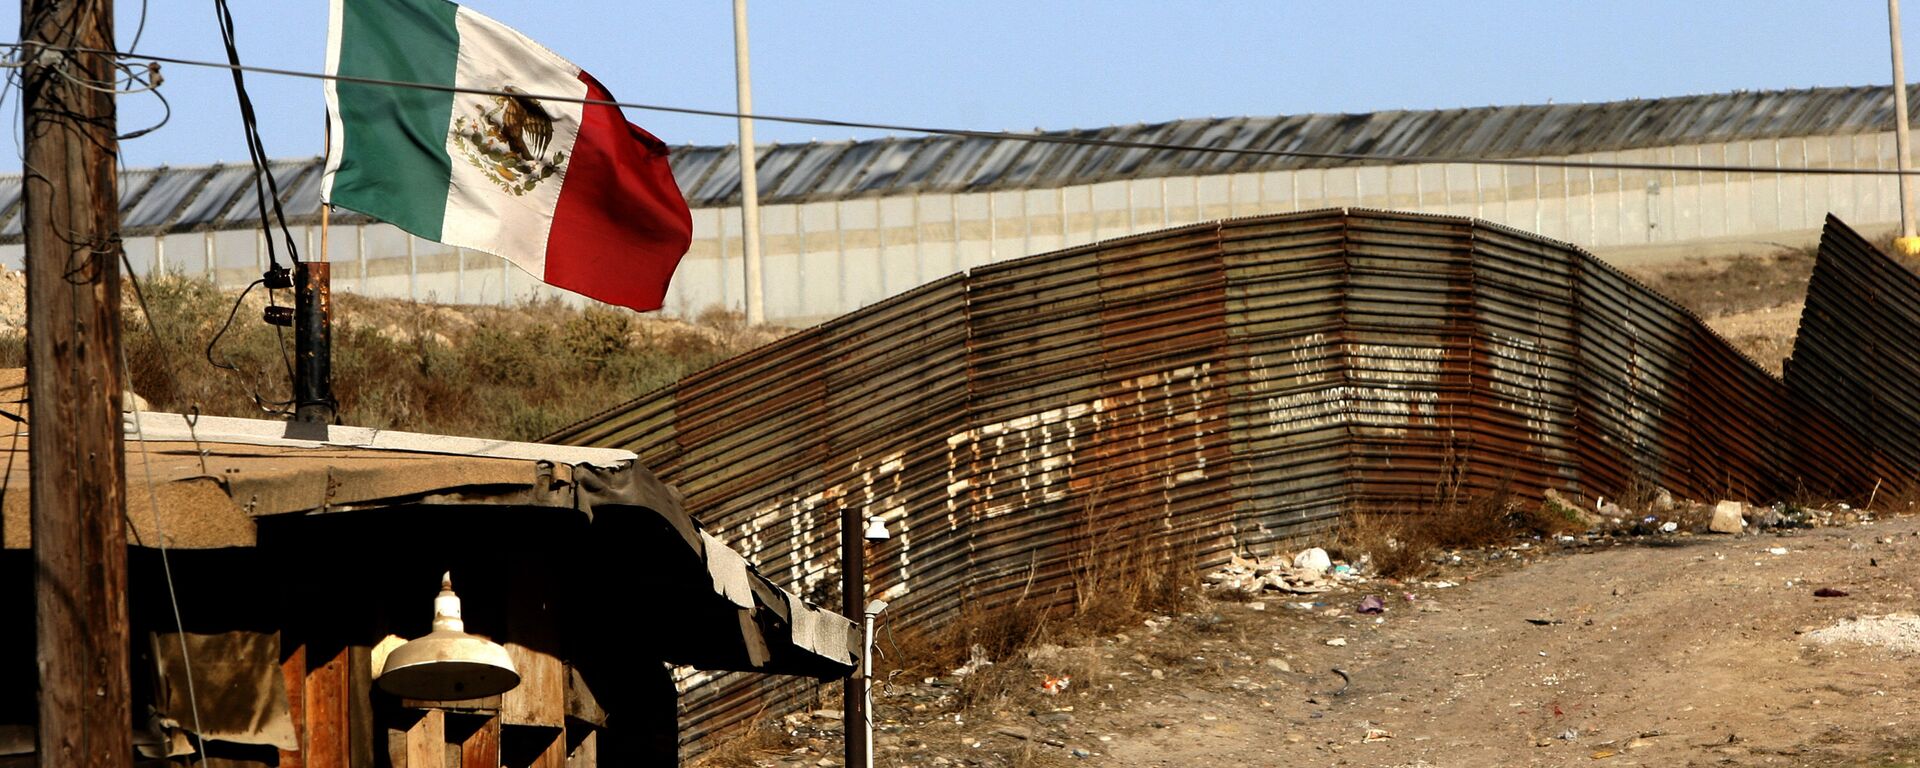 A Mexican flag waves close to the wall which separates Mexico from the United States 24 January 2006, in Tijuana, state of Baja California - Sputnik Mundo, 1920, 10.06.2021